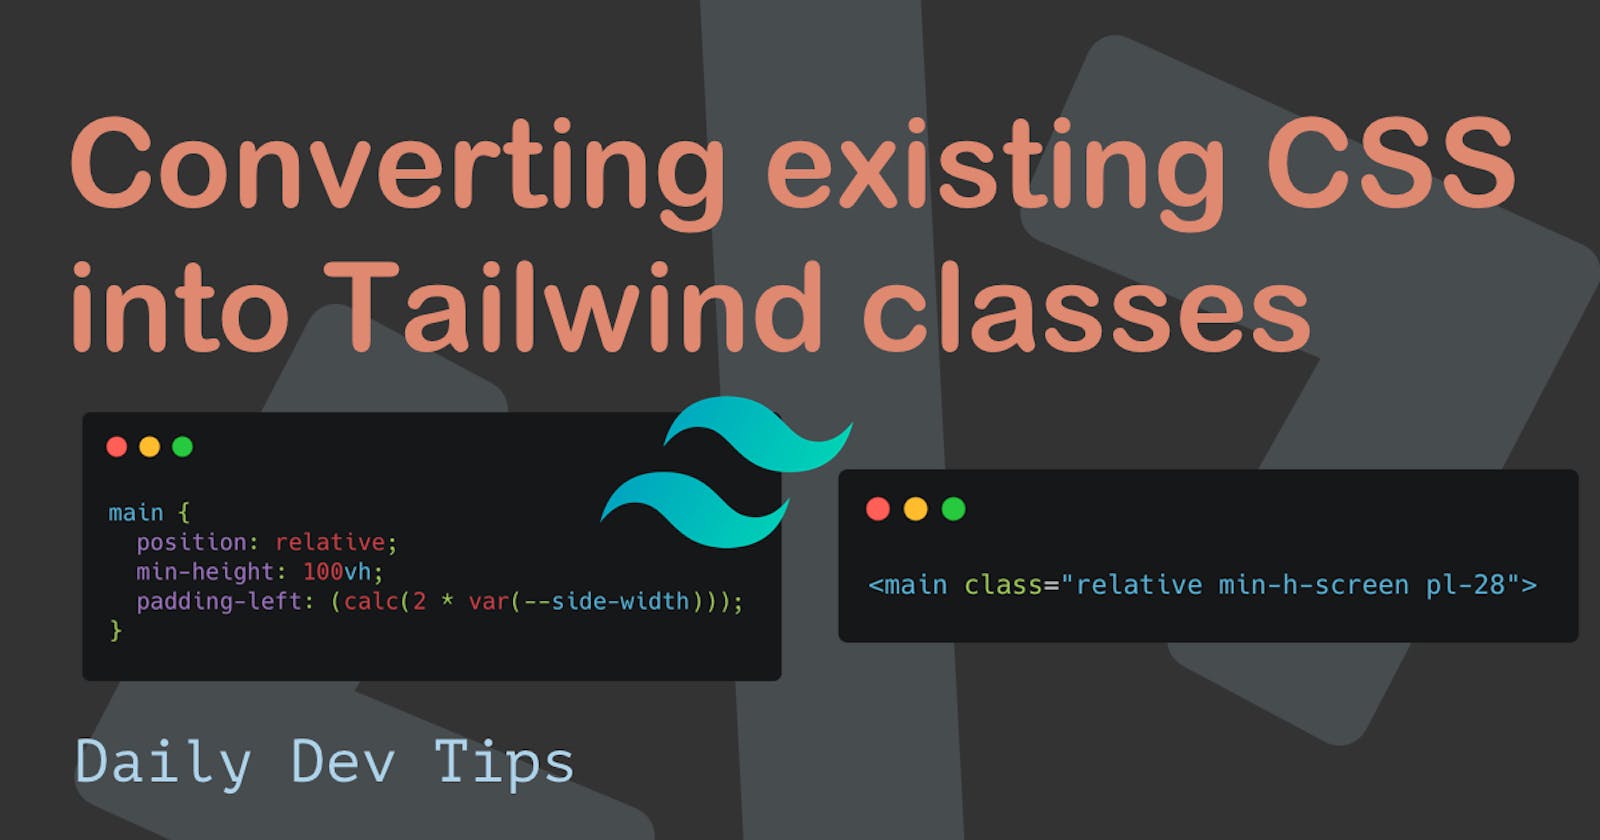 Converting existing CSS into Tailwind classes